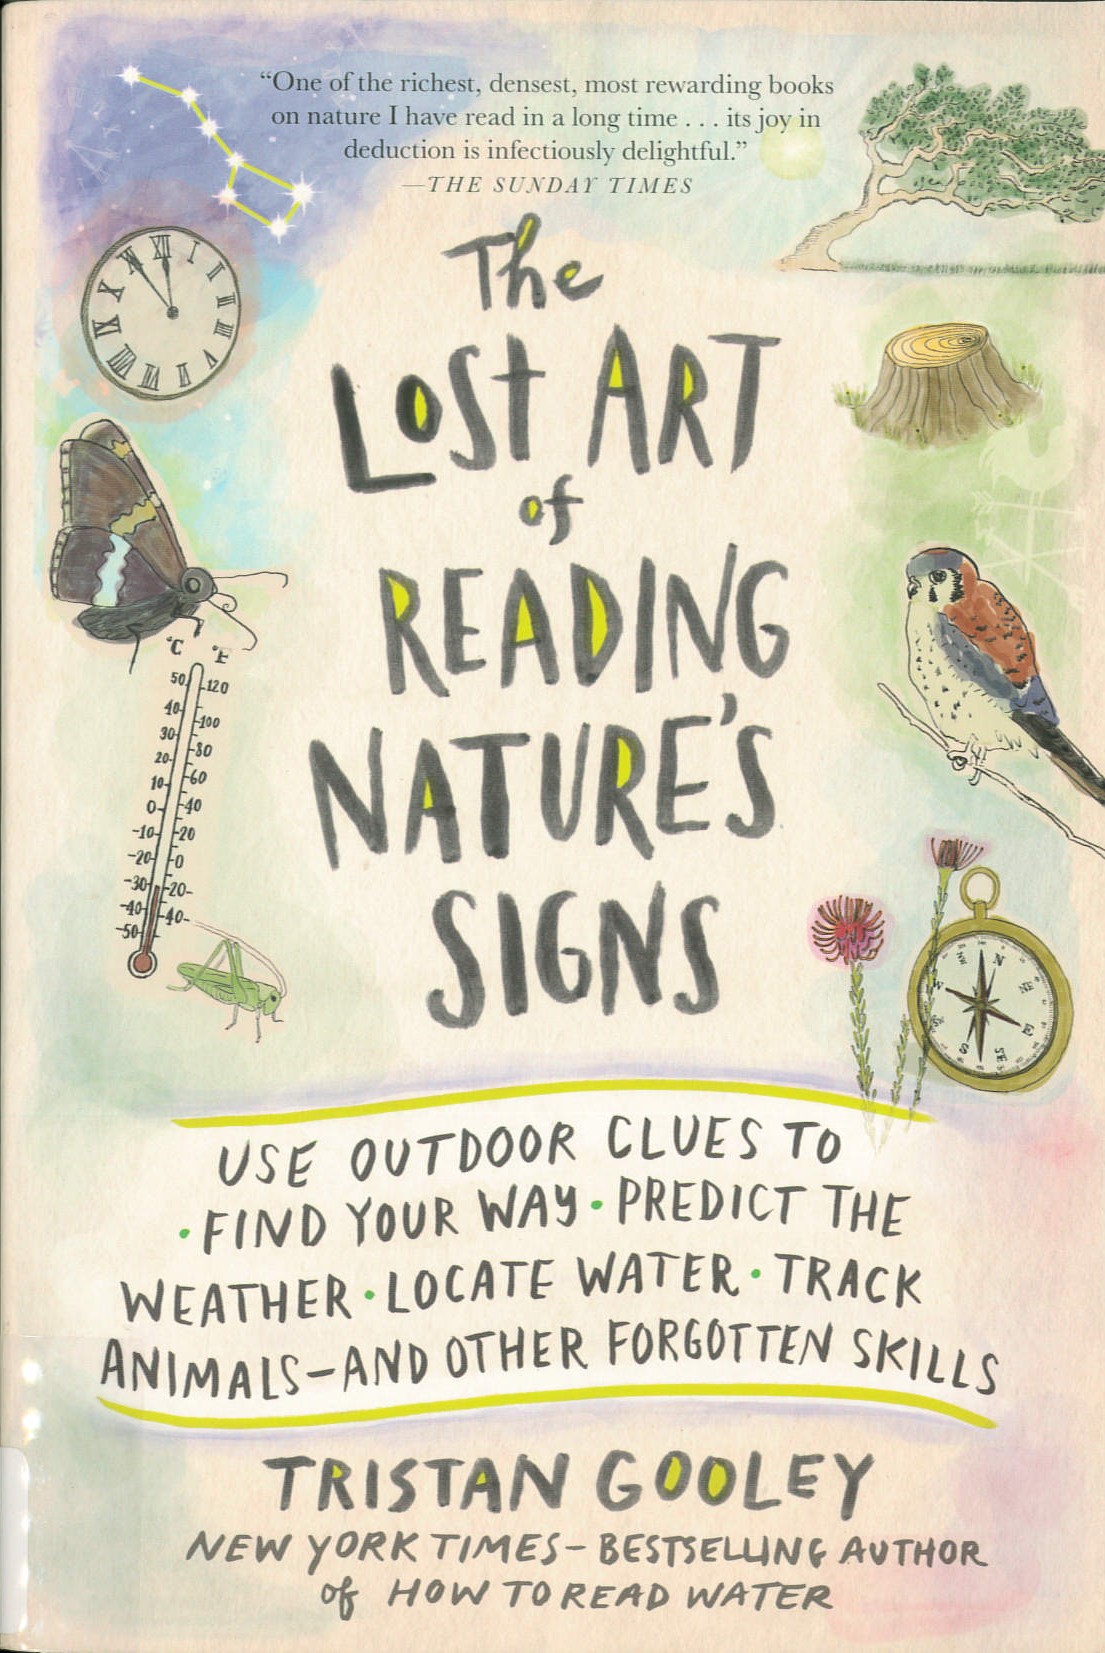 The lost art of reading nature